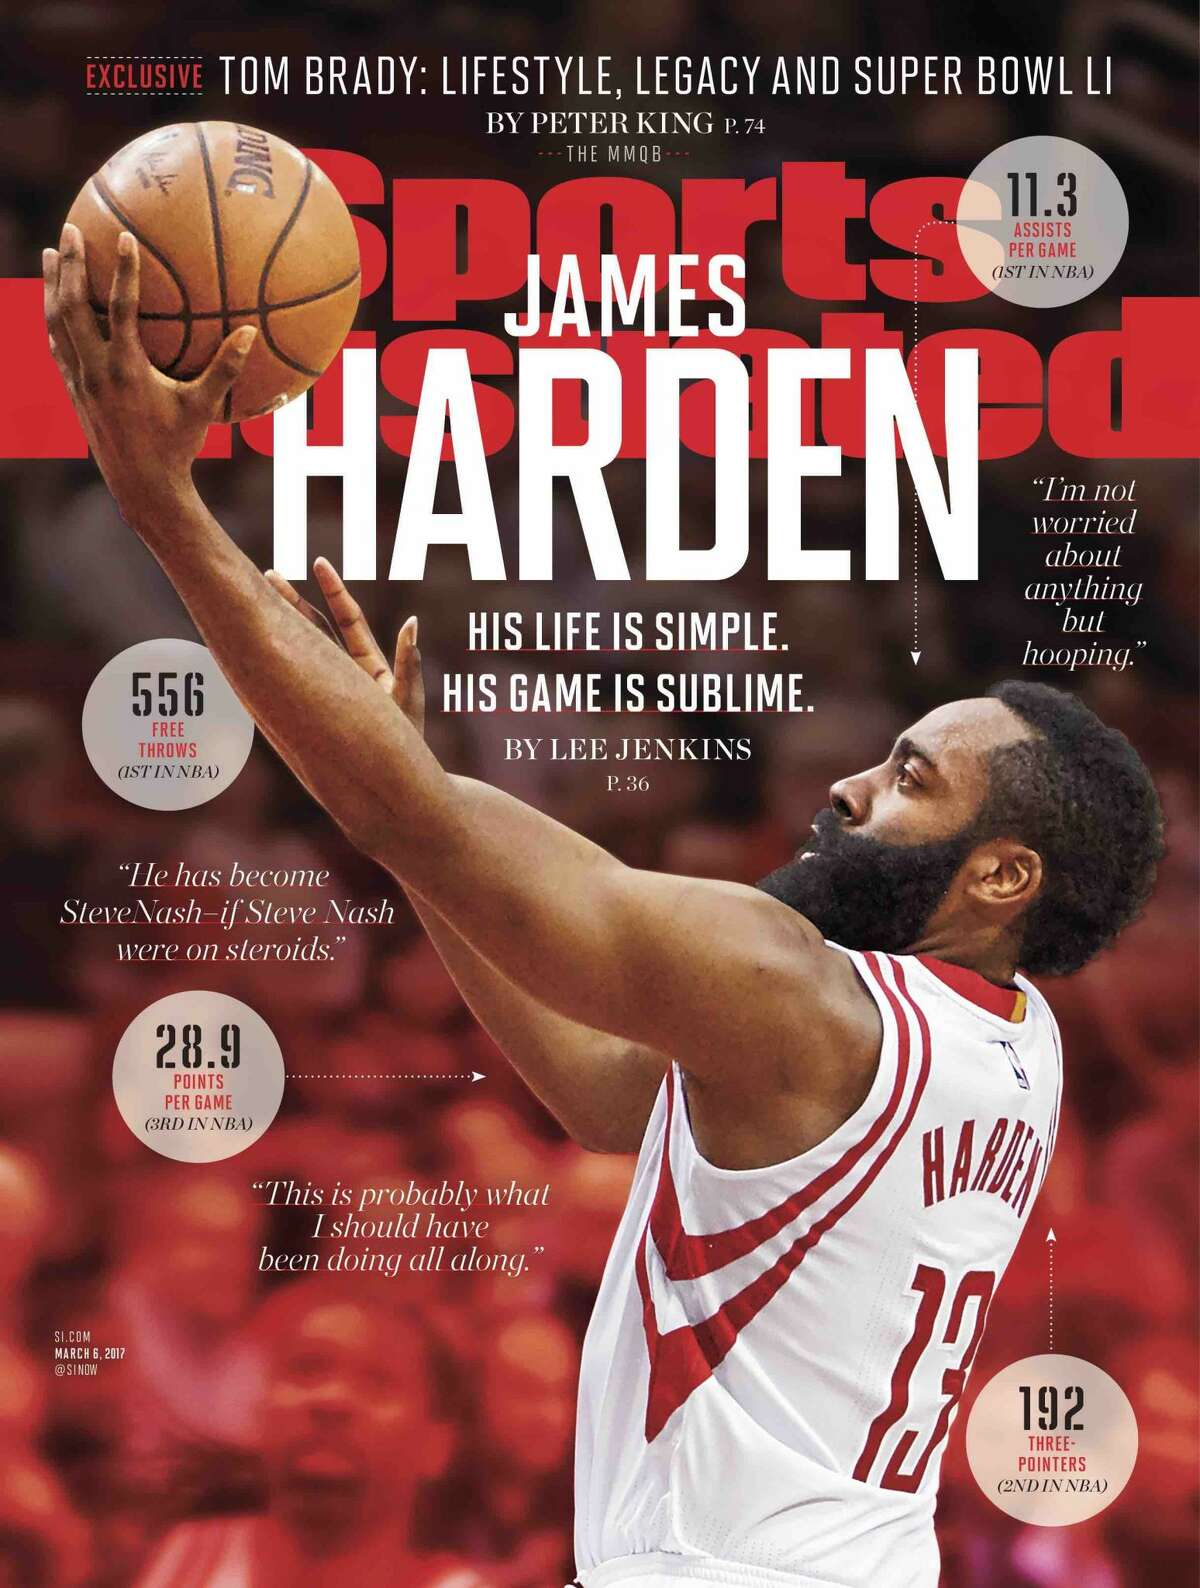 PHOTOS: Every time a Houston teams has appeared on a Sports Illustrated cover James Harden will be on the cover of the upcoming Sports Illustrated. Browse through the photos for all 29 times a Houston team has appeared on the cover of Sports Illustrated.